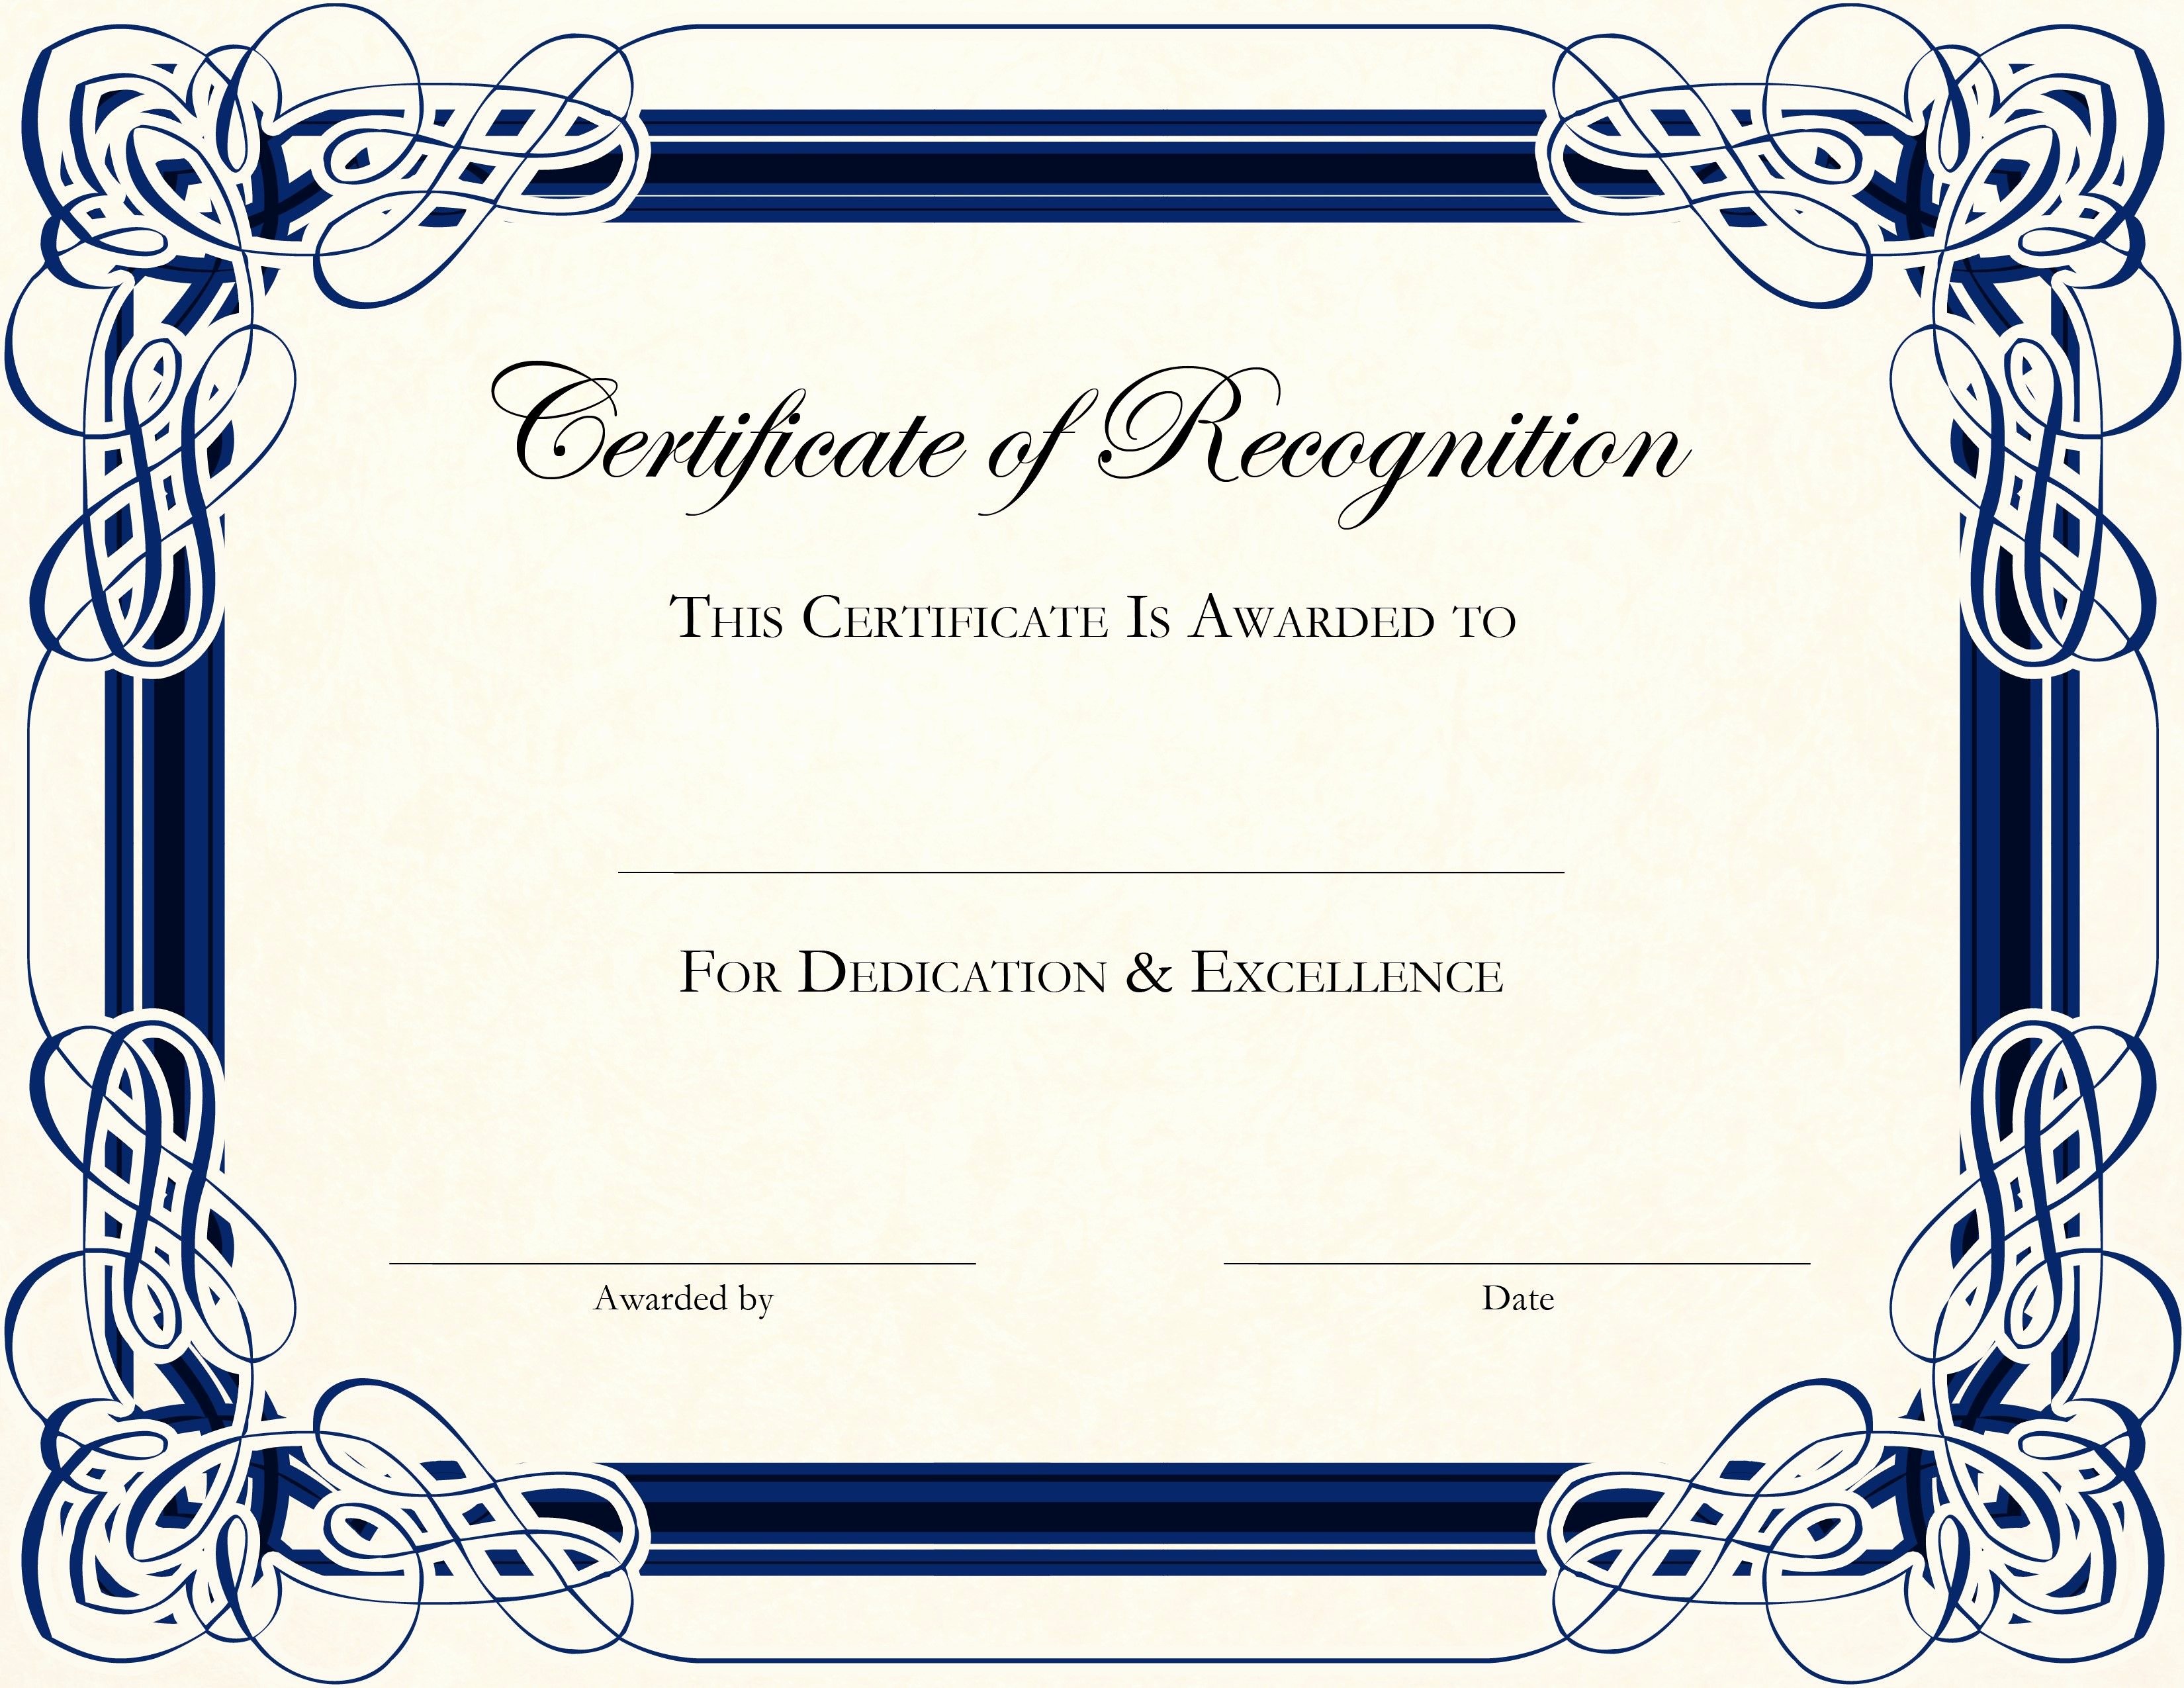 Diploma Templates Free Printable Awesome Free Printable Certificate Templates for Teachers